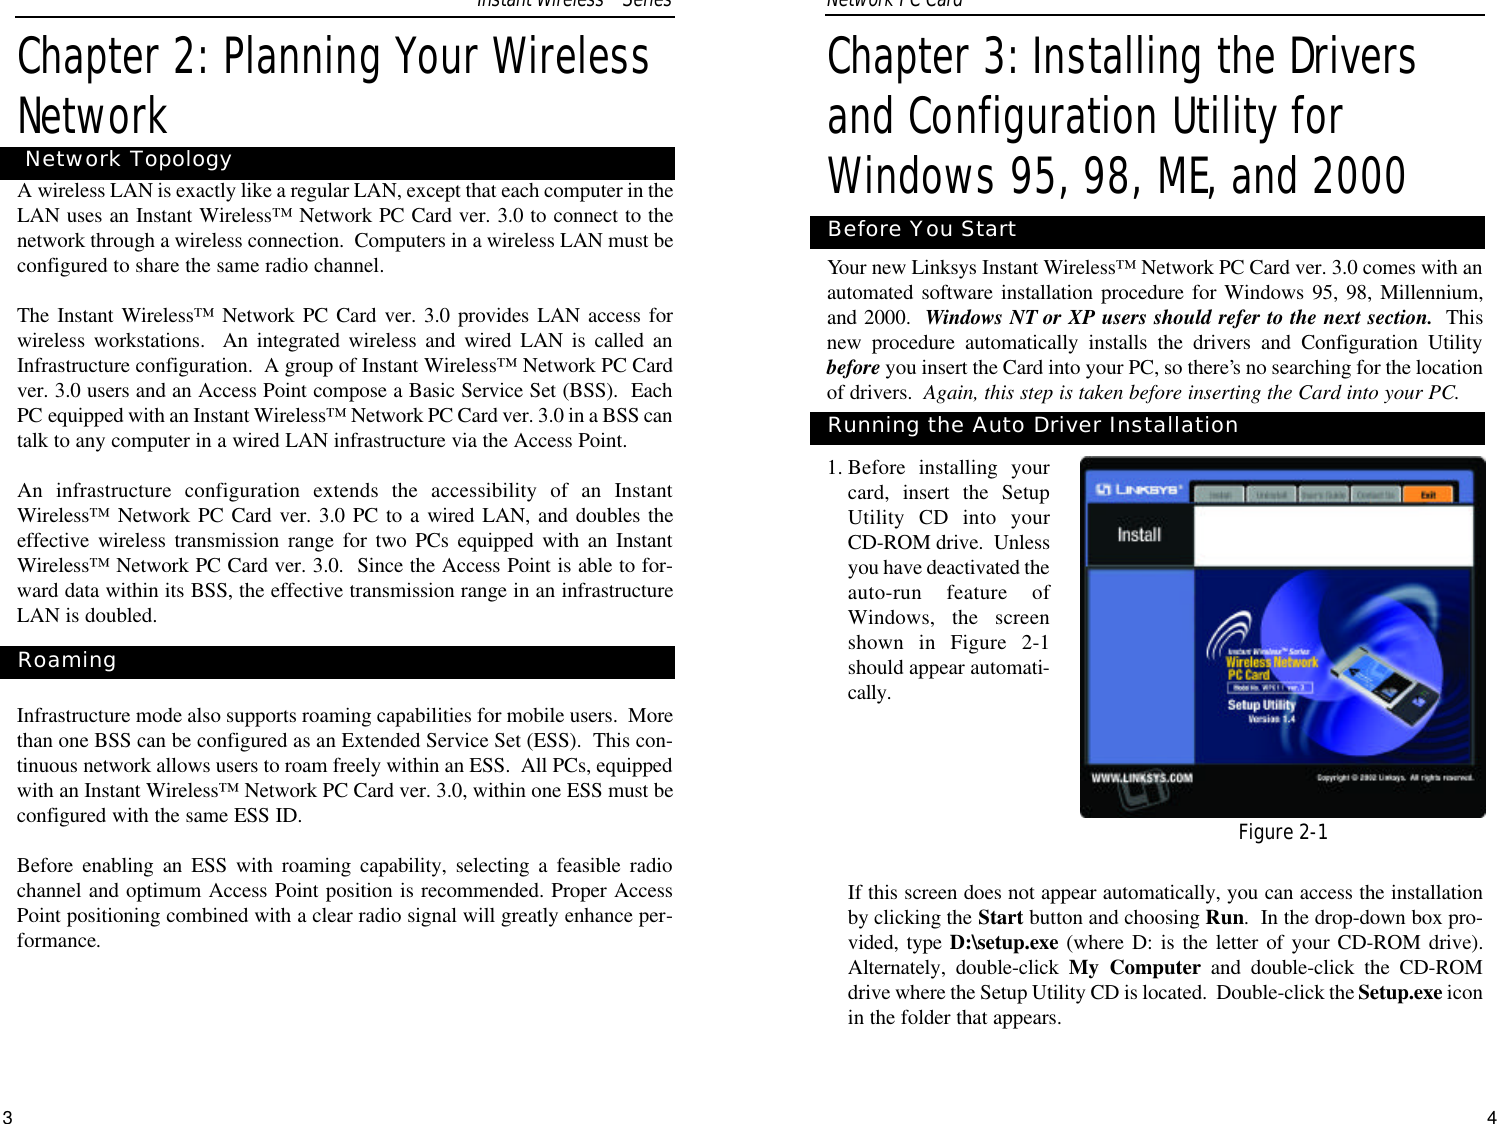 43Chapter 3: Installing the Driversand Configuration Utility forWindows 95, 98, ME, and 2000Your new Linksys Instant Wireless™ Network PC Card ver. 3.0 comes with anautomated software installation procedure for Windows 95, 98, Millennium,and 2000.  Windows NT or XP users should refer to the next section. Thisnew procedure automatically installs the drivers and Configuration Utilitybefore you insert the Card into your PC, so there’s no searching for the locationof drivers.  Again, this step is taken before inserting the Card into your PC.  1. Before installing yourcard, insert the SetupUtility CD into yourCD-ROM drive.  Unlessyou have deactivated theauto-run feature ofWindows, the screenshown in Figure 2-1should appear automati-cally.  If this screen does not appear automatically, you can access the installationby clicking the Start button and choosing Run.  In the drop-down box pro-vided, type D:\setup.exe (where D: is the letter of your CD-ROM drive).Alternately, double-click My Computer and double-click the CD-ROMdrive where the Setup Utility CD is located.  Double-click the Setup.exe iconin the folder that appears.Before You StartRunning the Auto Driver InstallationNetwork PC Card Chapter 2: Planning Your WirelessNetworkAwireless LAN is exactly like a regular LAN, except that each computer in theLAN uses an Instant Wireless™ Network PC Card ver. 3.0 to connect to thenetwork through a wireless connection.  Computers in a wireless LAN must beconfigured to share the same radio channel.The Instant Wireless™ Network PC Card ver. 3.0 provides LAN access forwireless workstations.  An integrated wireless and wired LAN is called anInfrastructure configuration.  A group of Instant Wireless™ Network PC Cardver. 3.0 users and an Access Point compose a Basic Service Set (BSS).  EachPC equipped with an Instant Wireless™ Network PC Card ver. 3.0 in a BSS cantalk to any computer in a wired LAN infrastructure via the Access Point.An infrastructure configuration extends the accessibility of an InstantWireless™ Network PC Card ver. 3.0 PC to a wired LAN, and doubles theeffective wireless transmission range for two PCs equipped with an InstantWireless™ Network PC Card ver. 3.0.  Since the Access Point is able to for-ward data within its BSS, the effective transmission range in an infrastructureLAN is doubled.Infrastructure mode also supports roaming capabilities for mobile users.  Morethan one BSS can be configured as an Extended Service Set (ESS).  This con-tinuous network allows users to roam freely within an ESS.  All PCs, equippedwith an Instant Wireless™ Network PC Card ver. 3.0, within one ESS must beconfigured with the same ESS ID.Before enabling an ESS with roaming capability, selecting a feasible radiochannel and optimum Access Point position is recommended. Proper AccessPoint positioning combined with a clear radio signal will greatly enhance per-formance.RoamingNetwork TopologyFigure 2-1Instant WirelessTMSeries